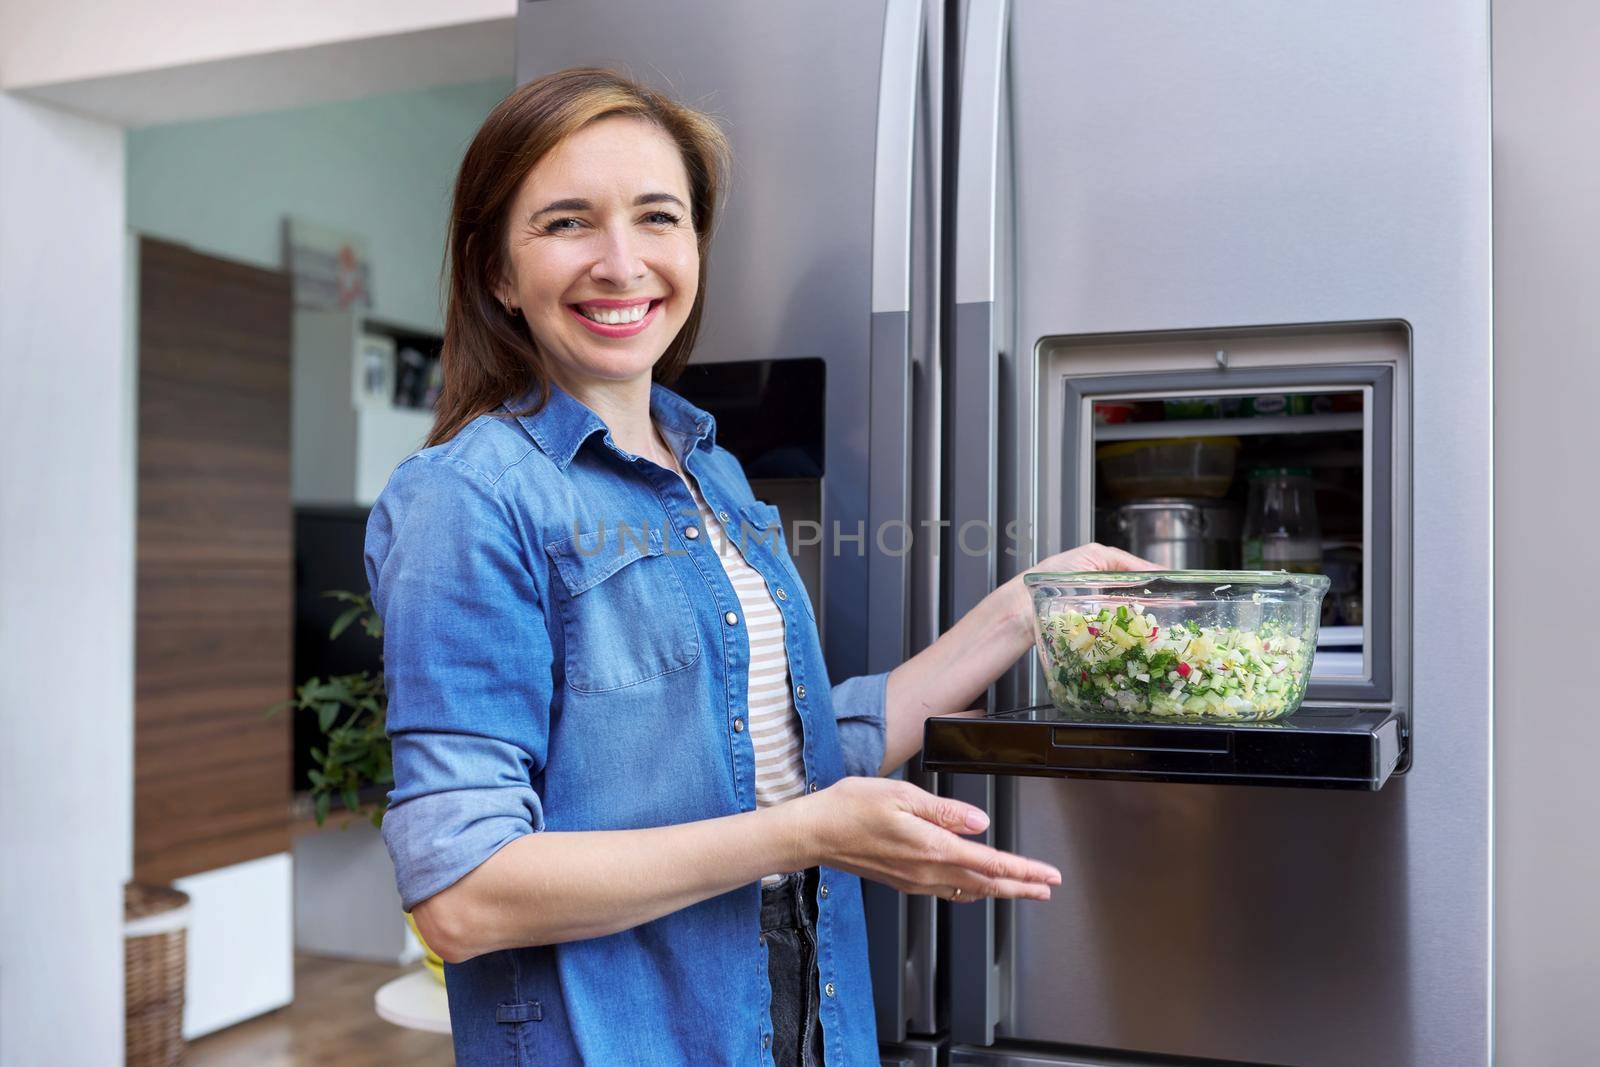 Woman with bowl of vegetable salad from refrigerator. by VH-studio